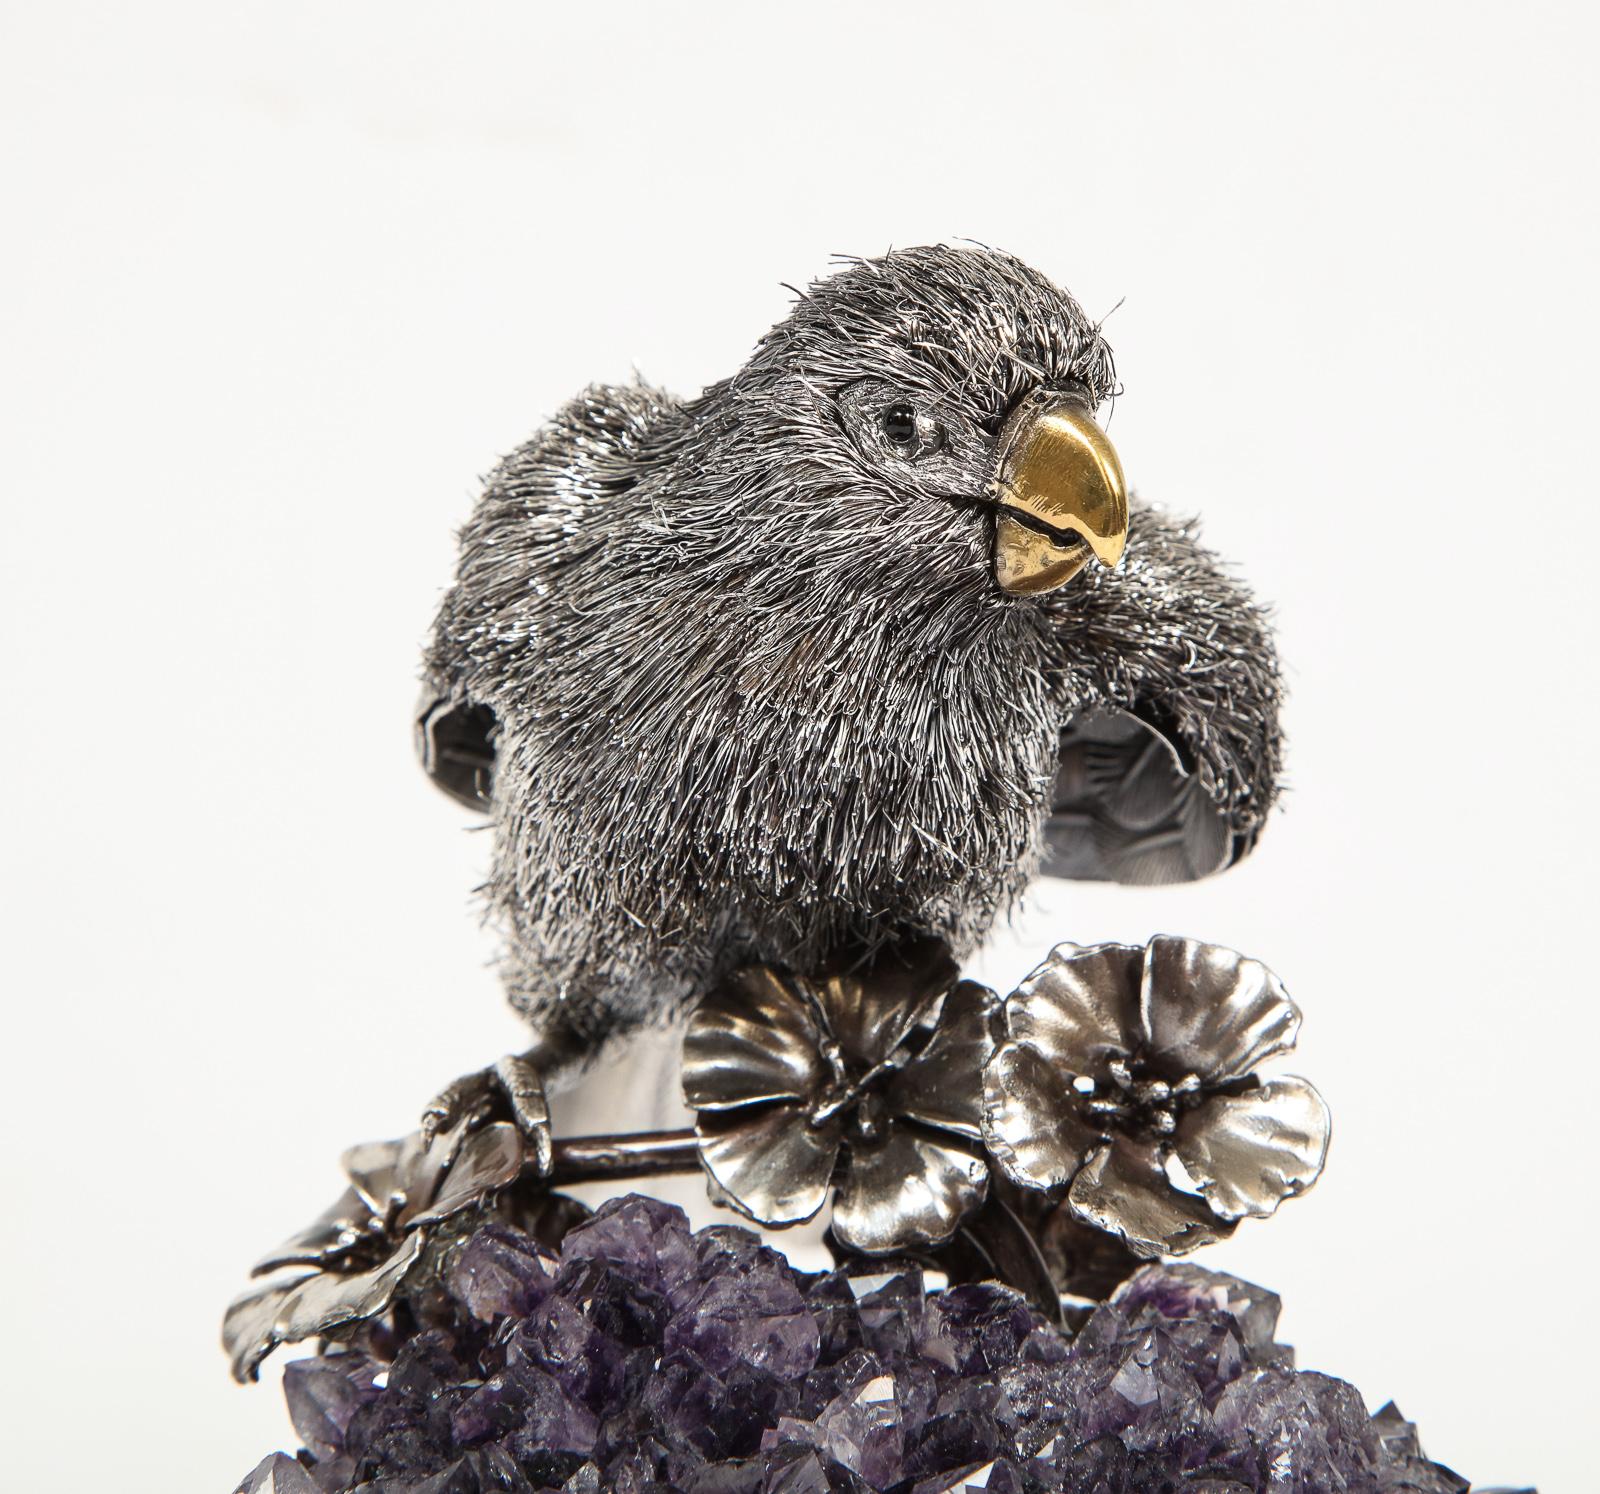 Mario Buccellati, an Exceptional Italian Silver Parrot on Amethyst 1